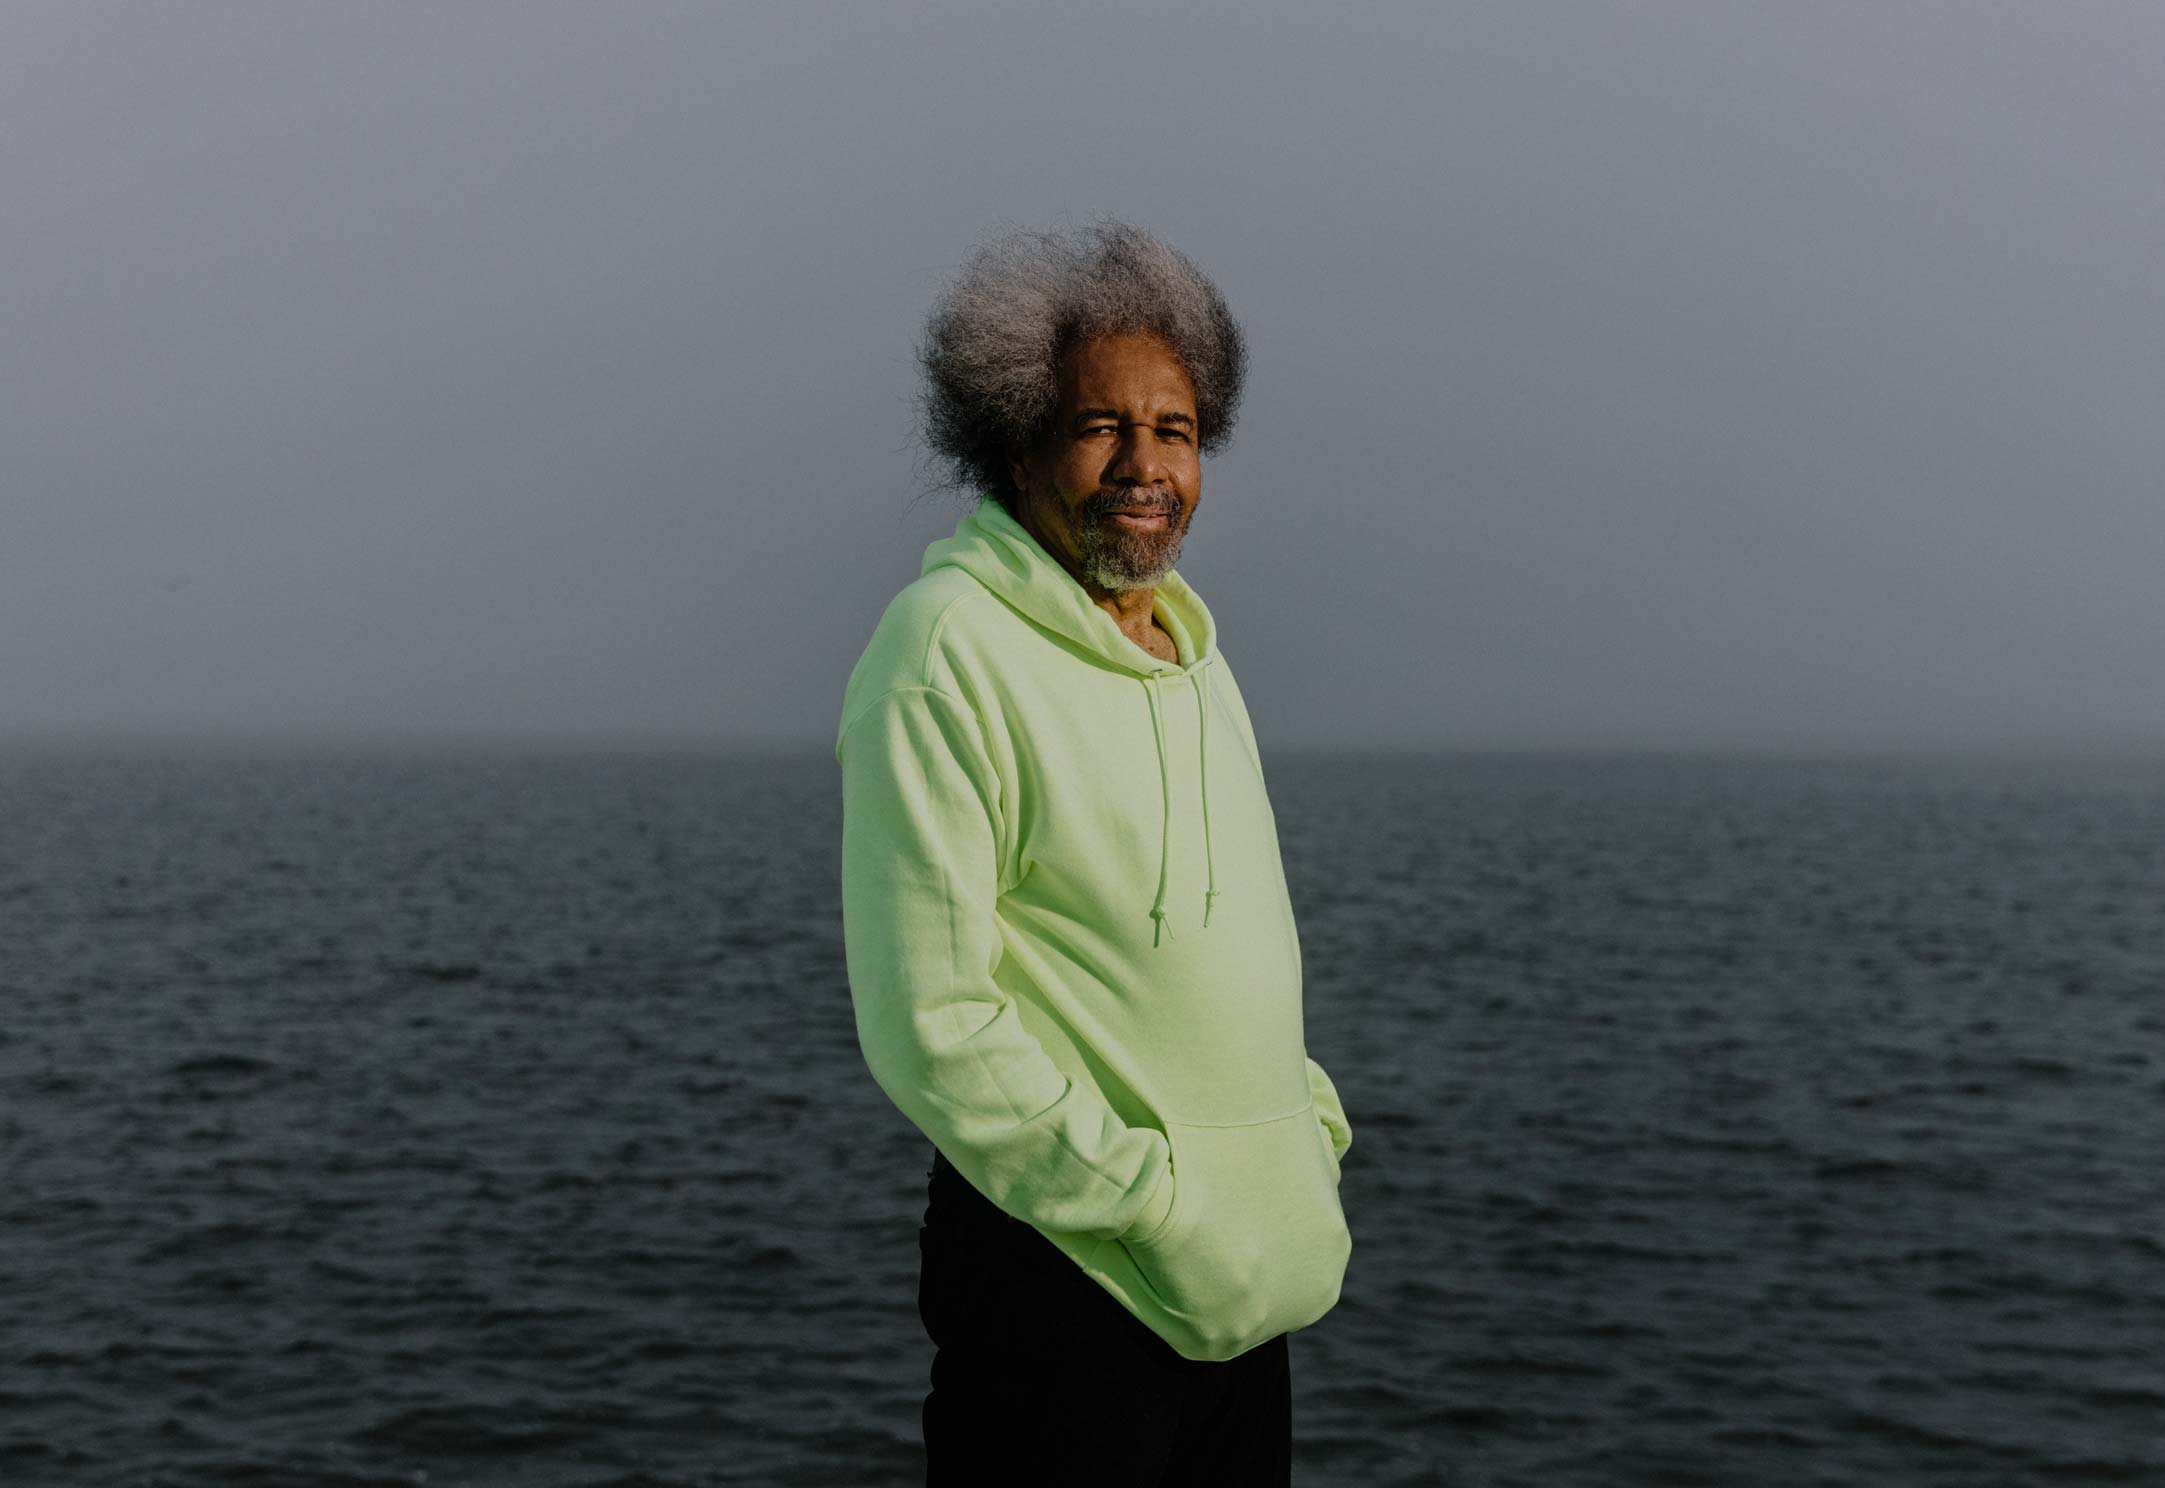 Albert Woodfox: A ‘Country Boy’ Turned Black Panther Reflects on Life After 45 Years of Solitary Confinement